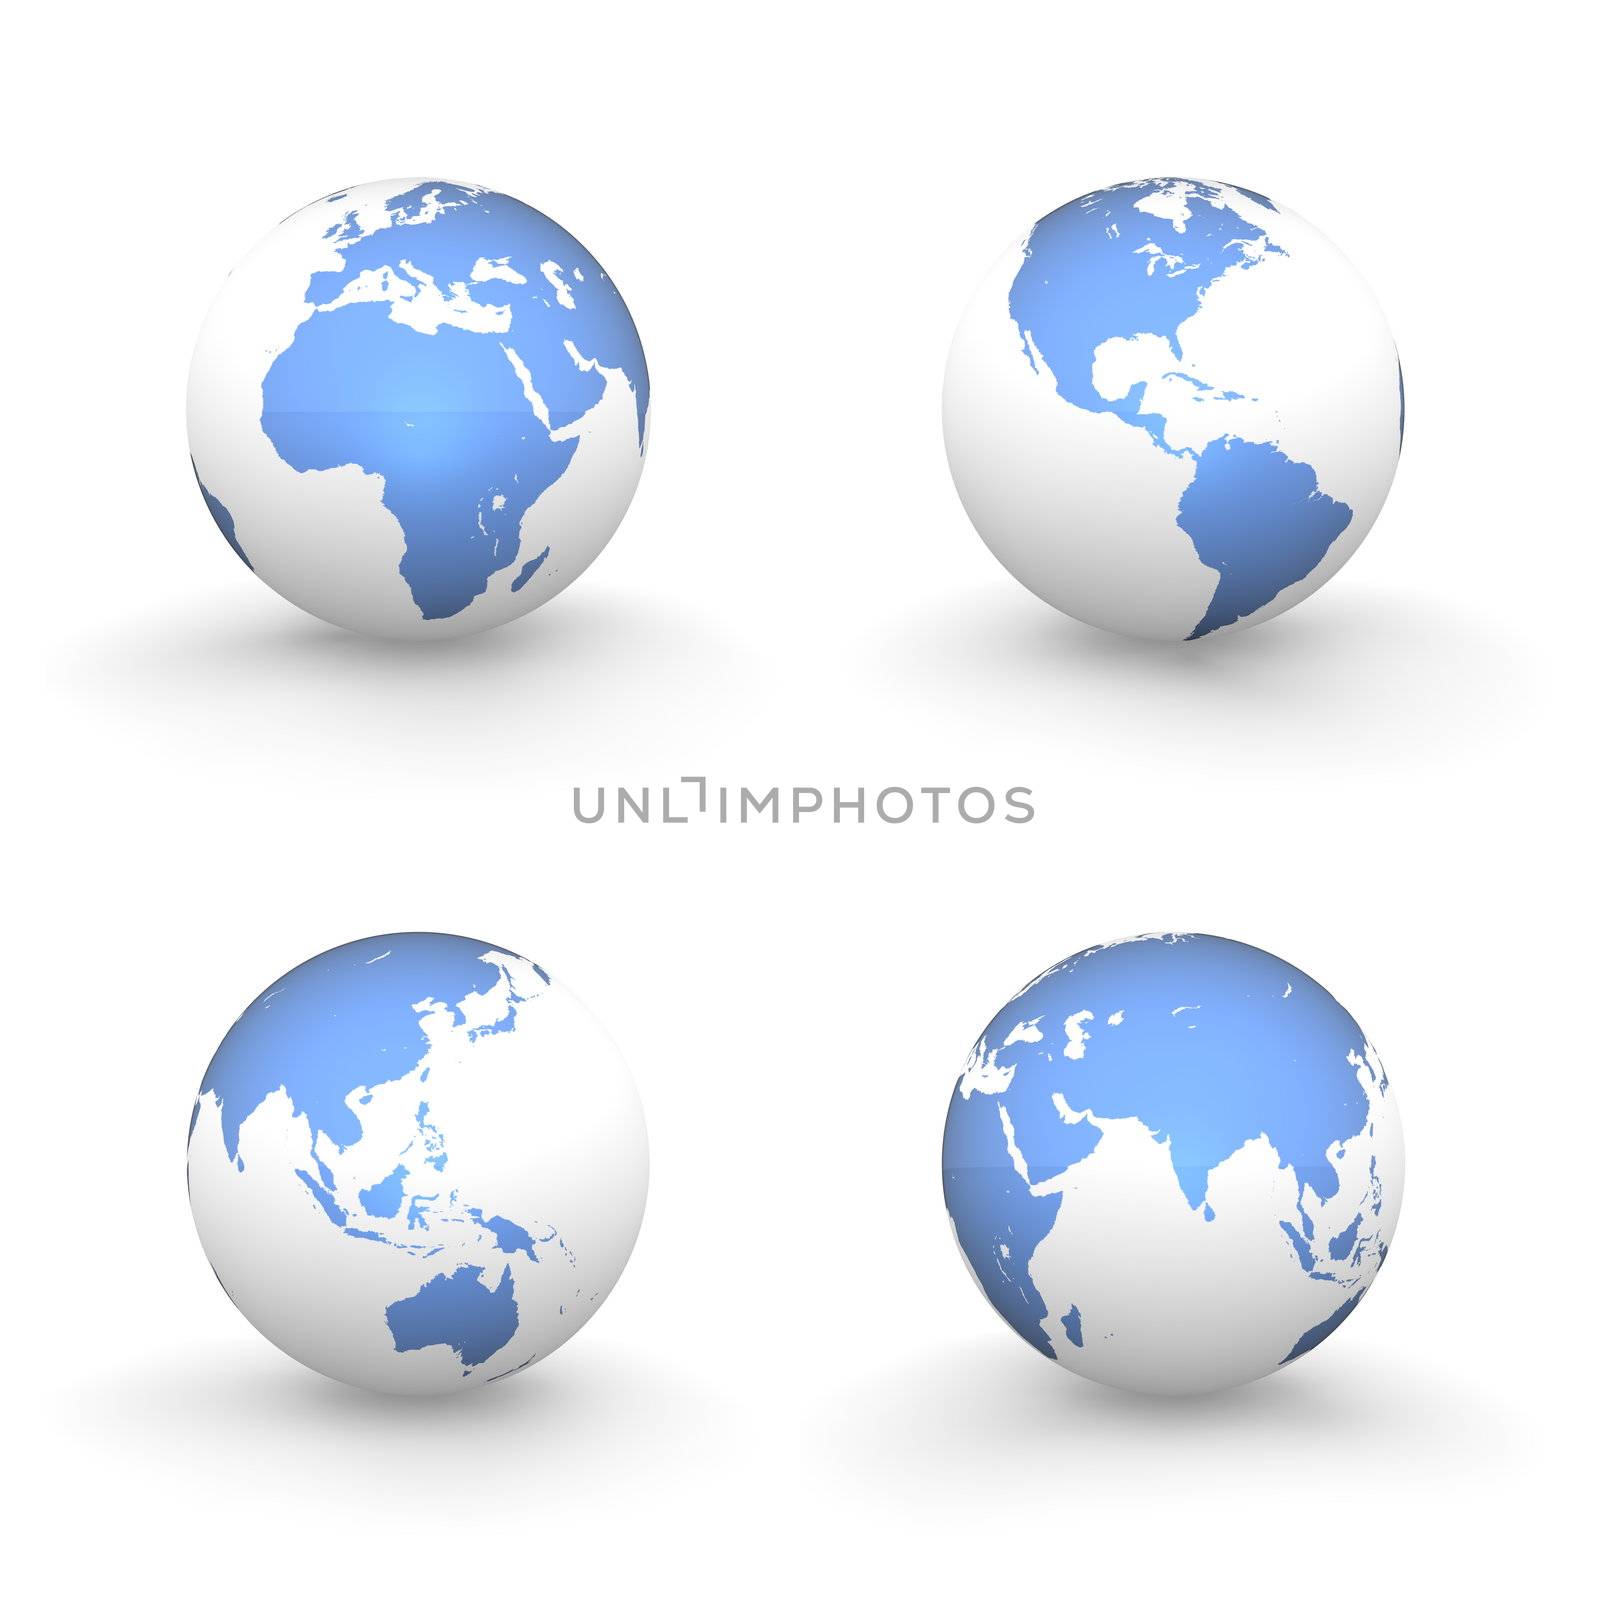 four views of a 3D globe with shiny blue continents and a white ocean